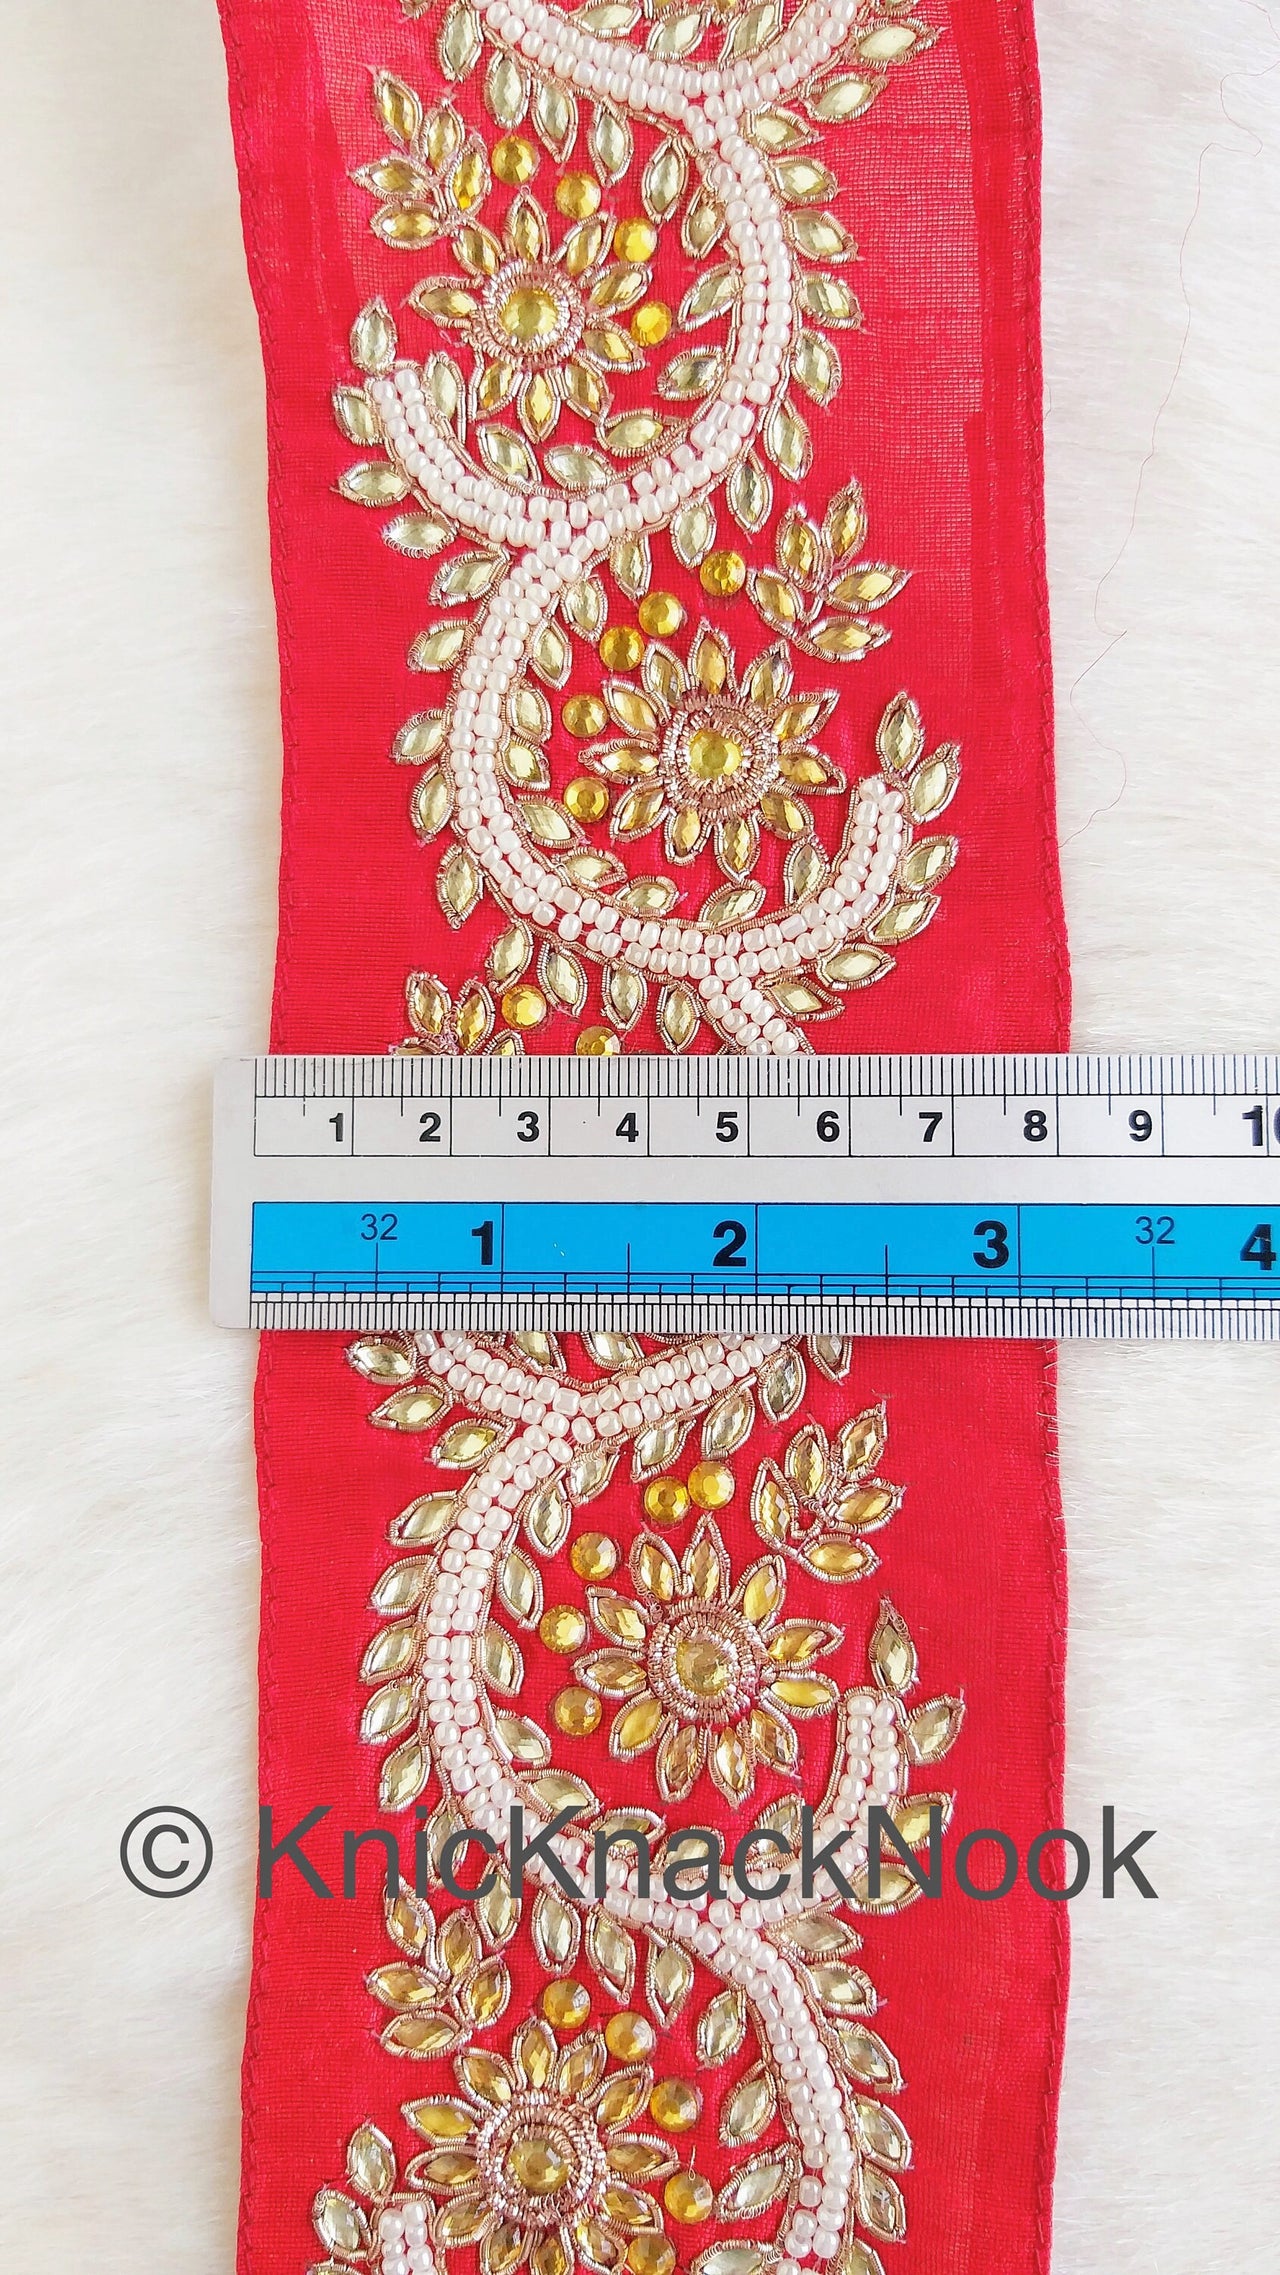 Red Silk Lace Trim With Floral Zardozi Hand Embroidery And White Beads & Indian Stones Kundan Embellishment, Approx. 80mm, Decorative Trim